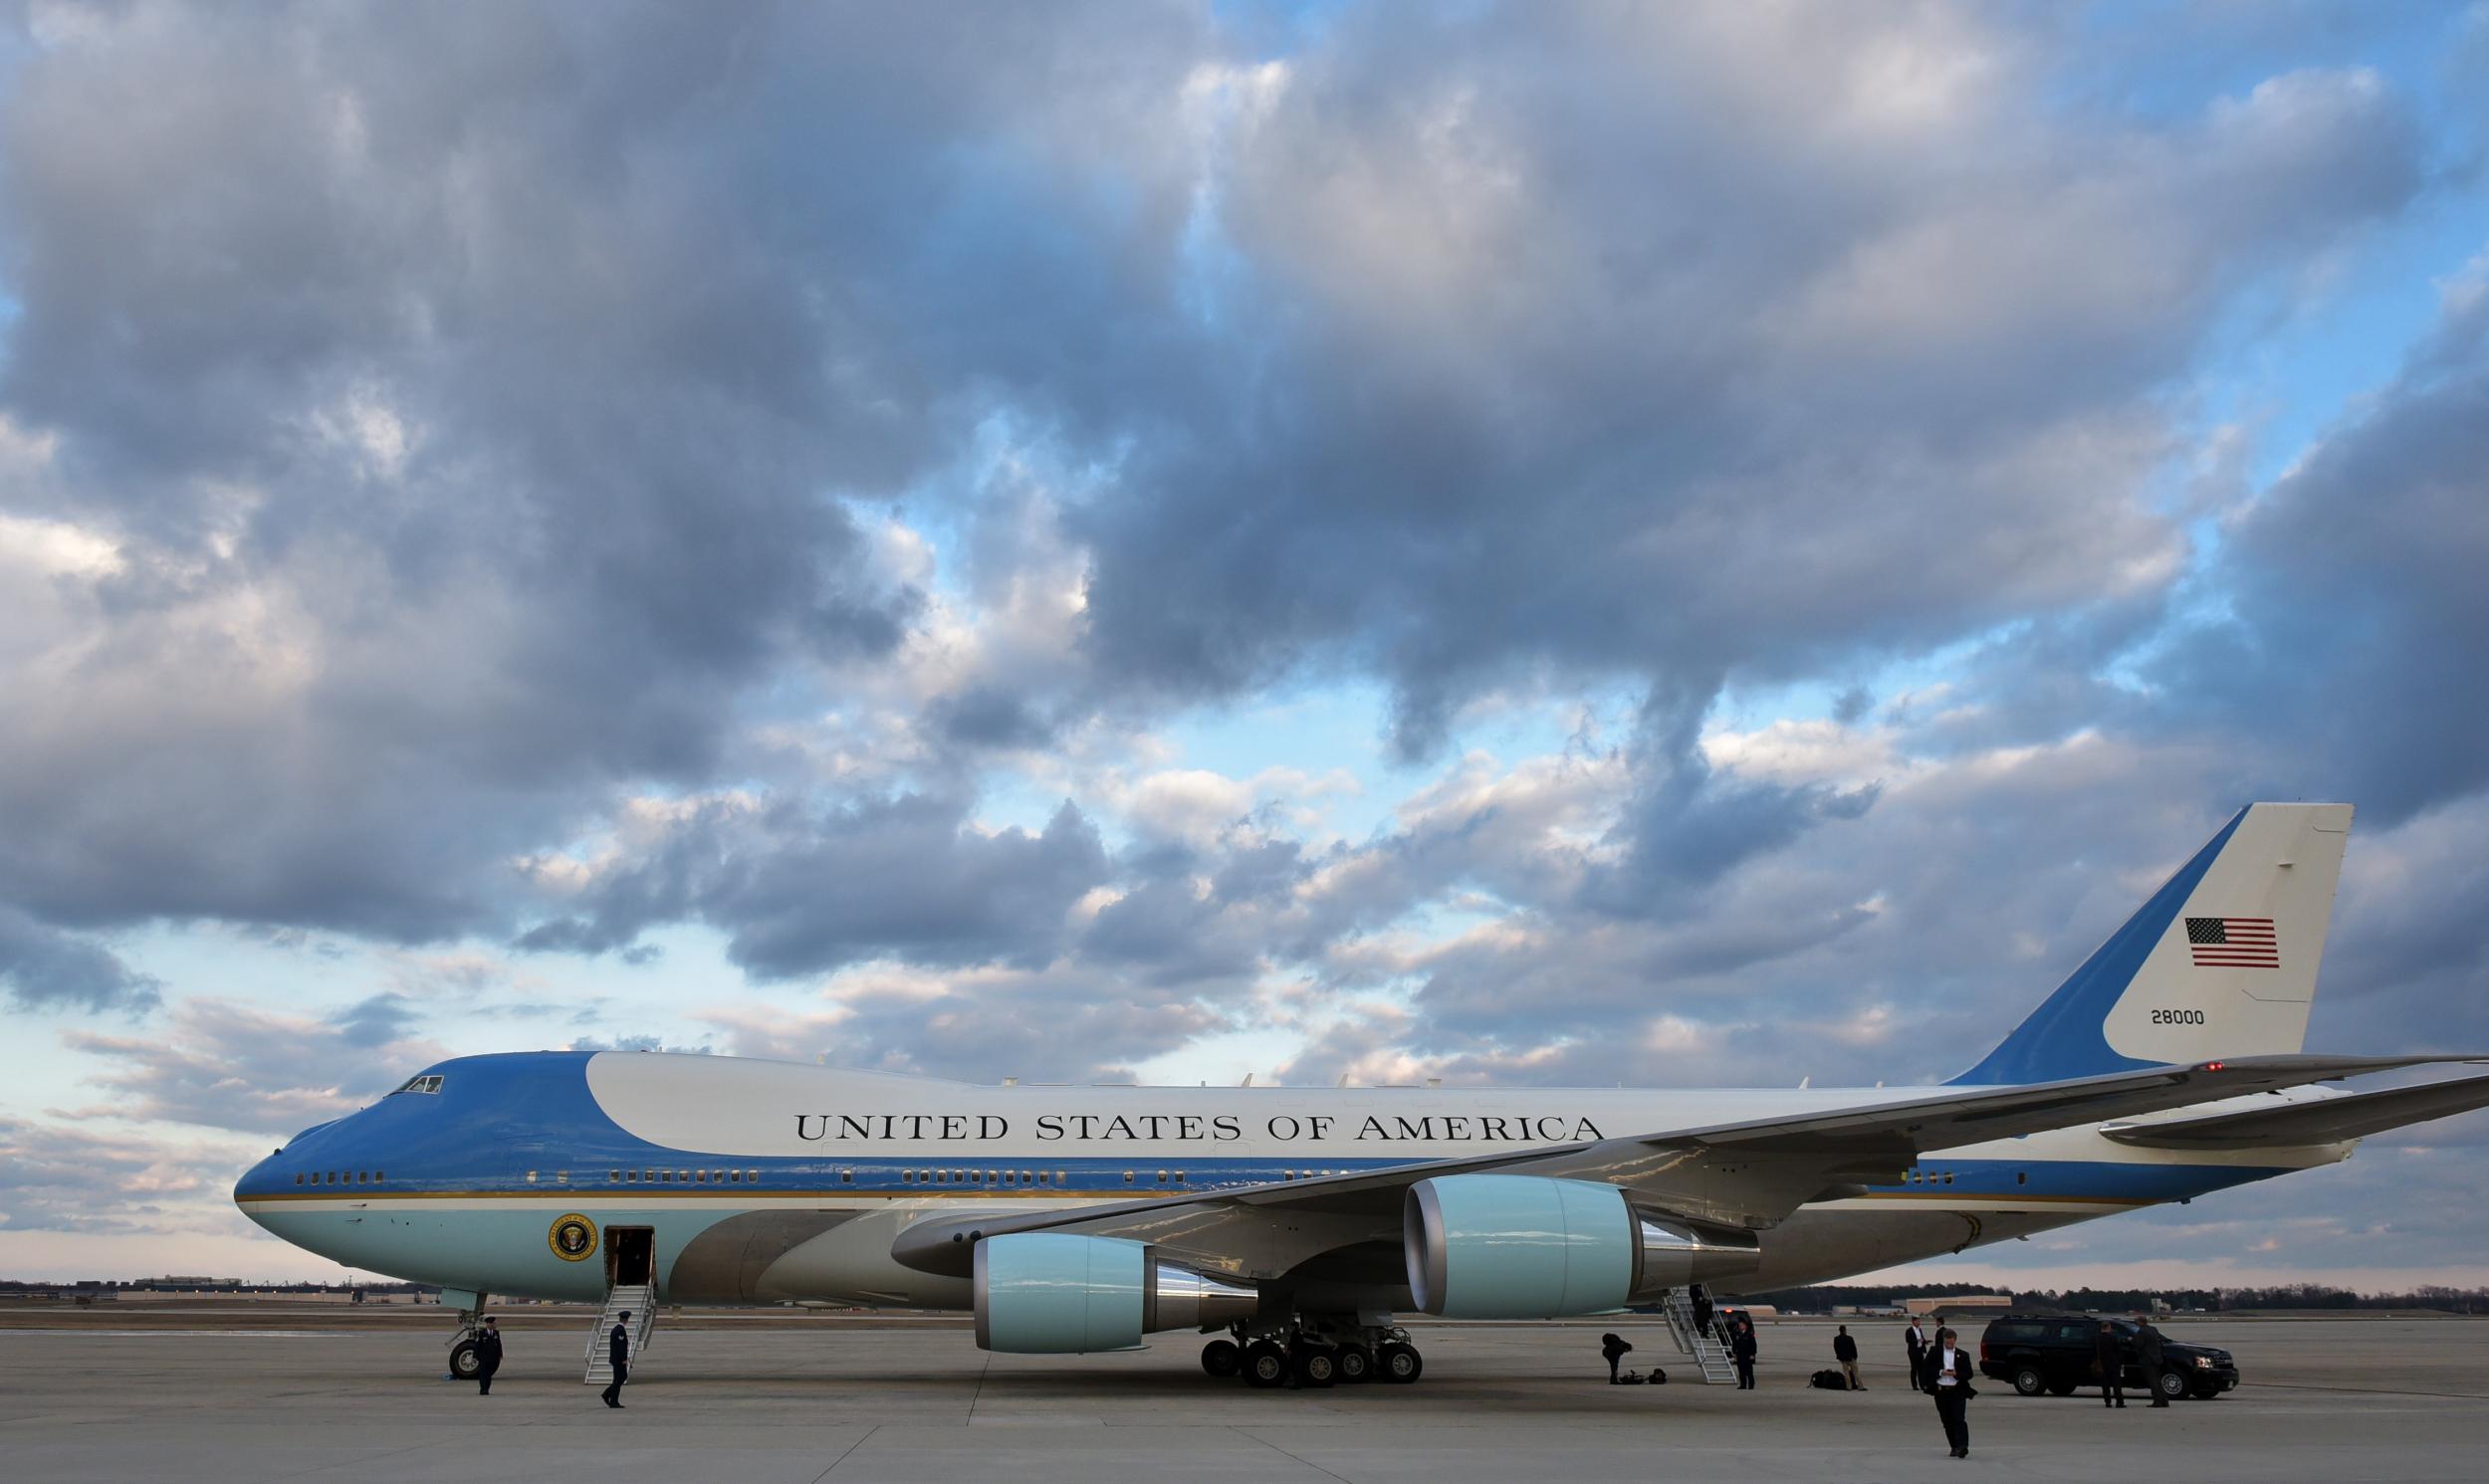 Plans are being drawn up for a bigger Air Force One